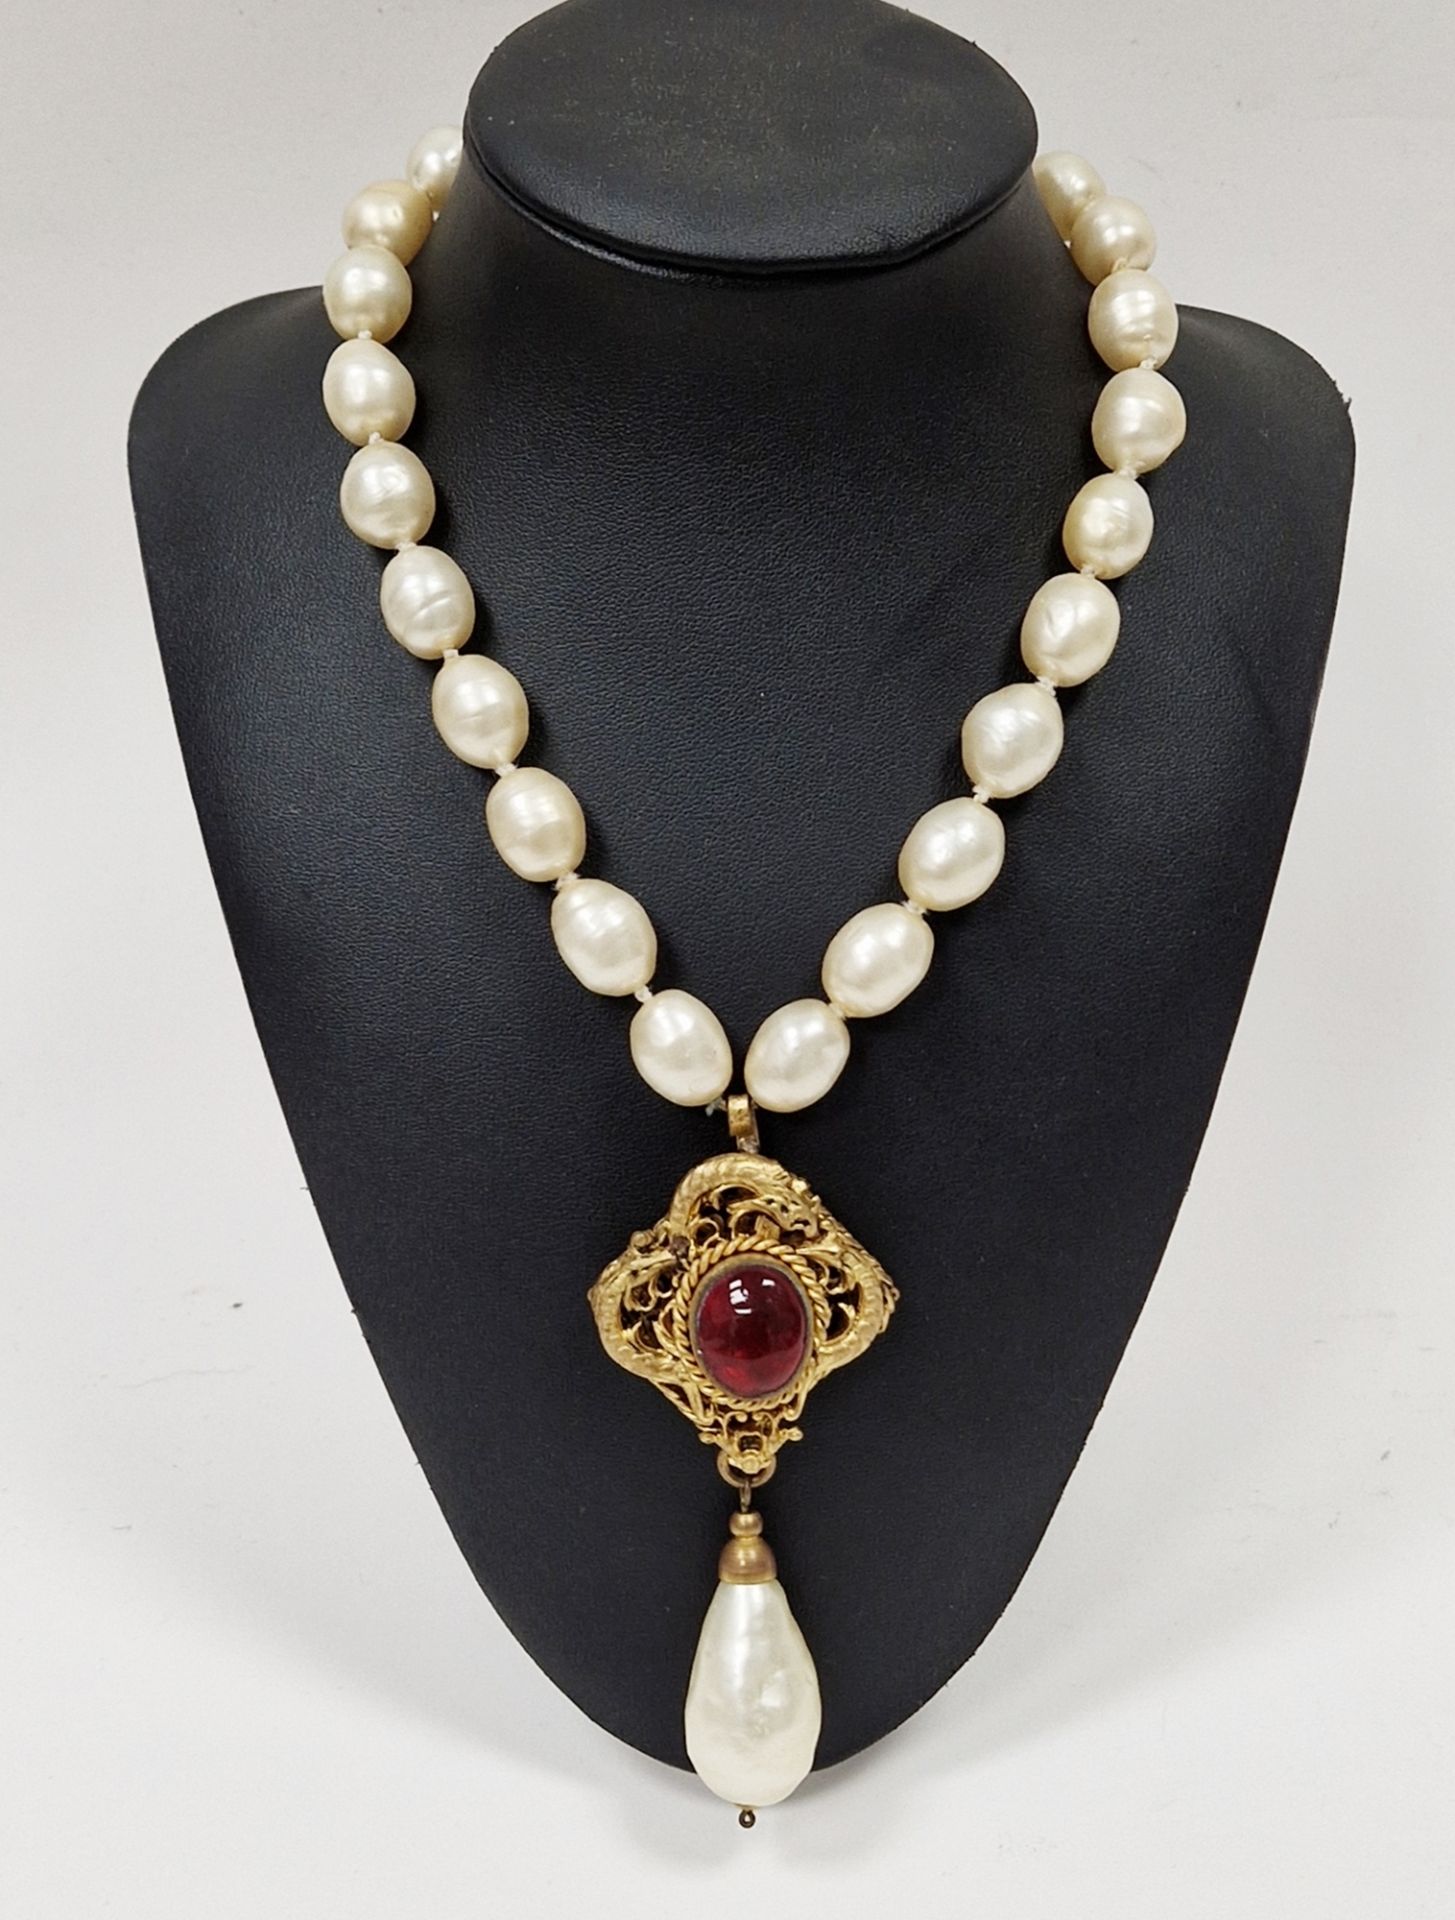 1980's Chanel simulated blister pearl and garnet choker necklace, formed of large oval faux pearl